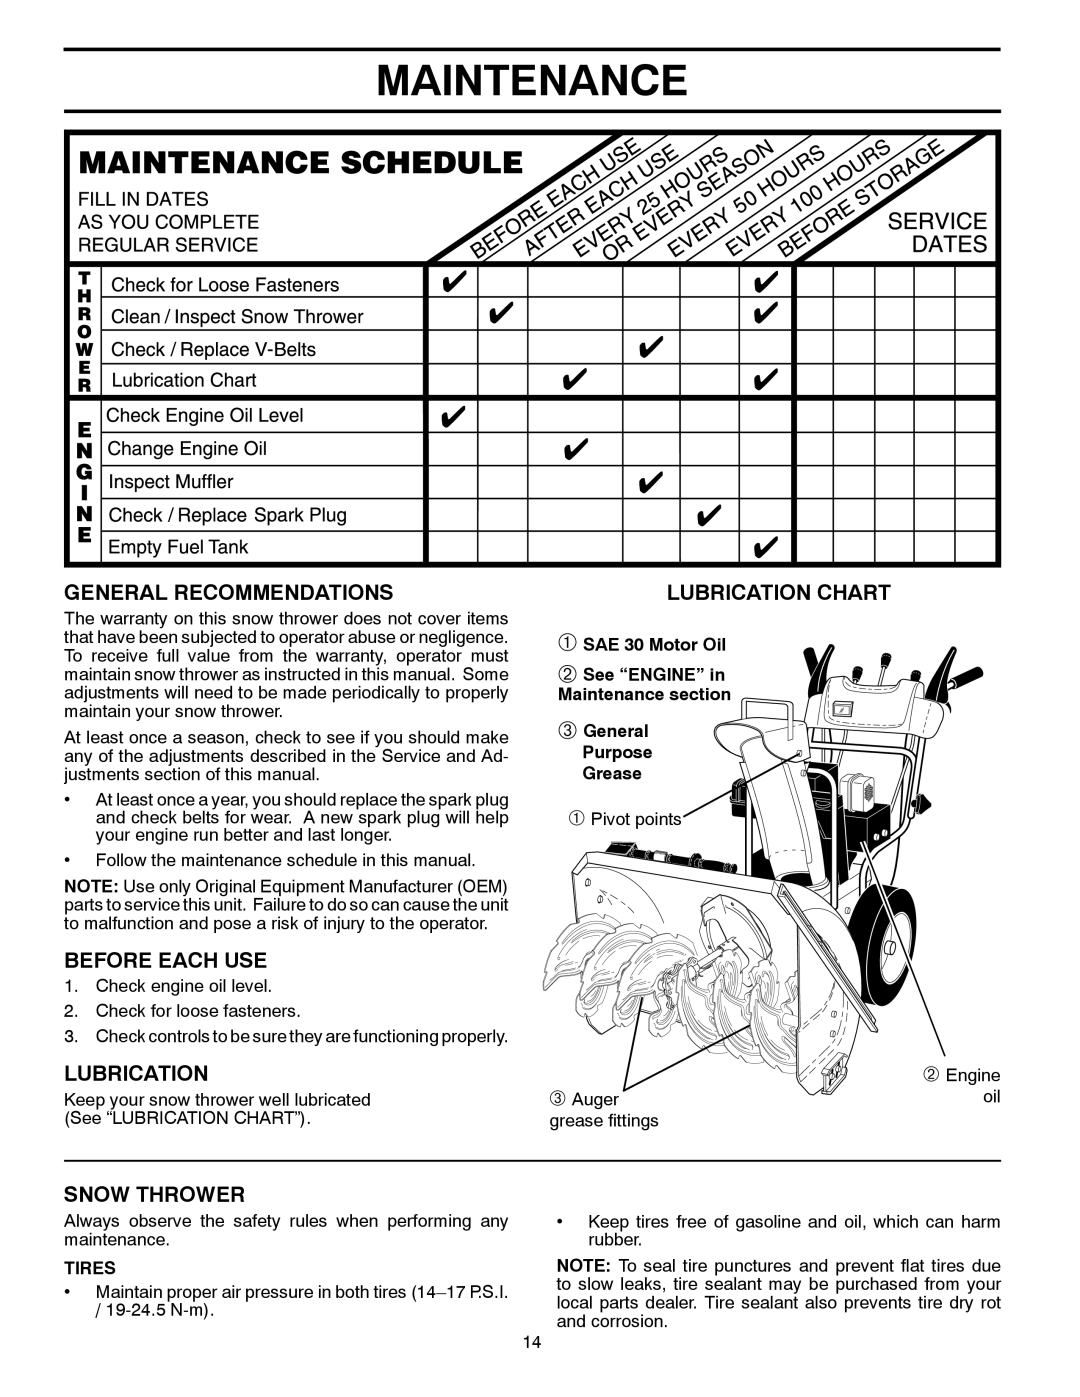 Husqvarna 1130SB-LSB Maintenance, General Recommendations, Before Each Use, Snow Thrower, Lubrication Chart, Tires 